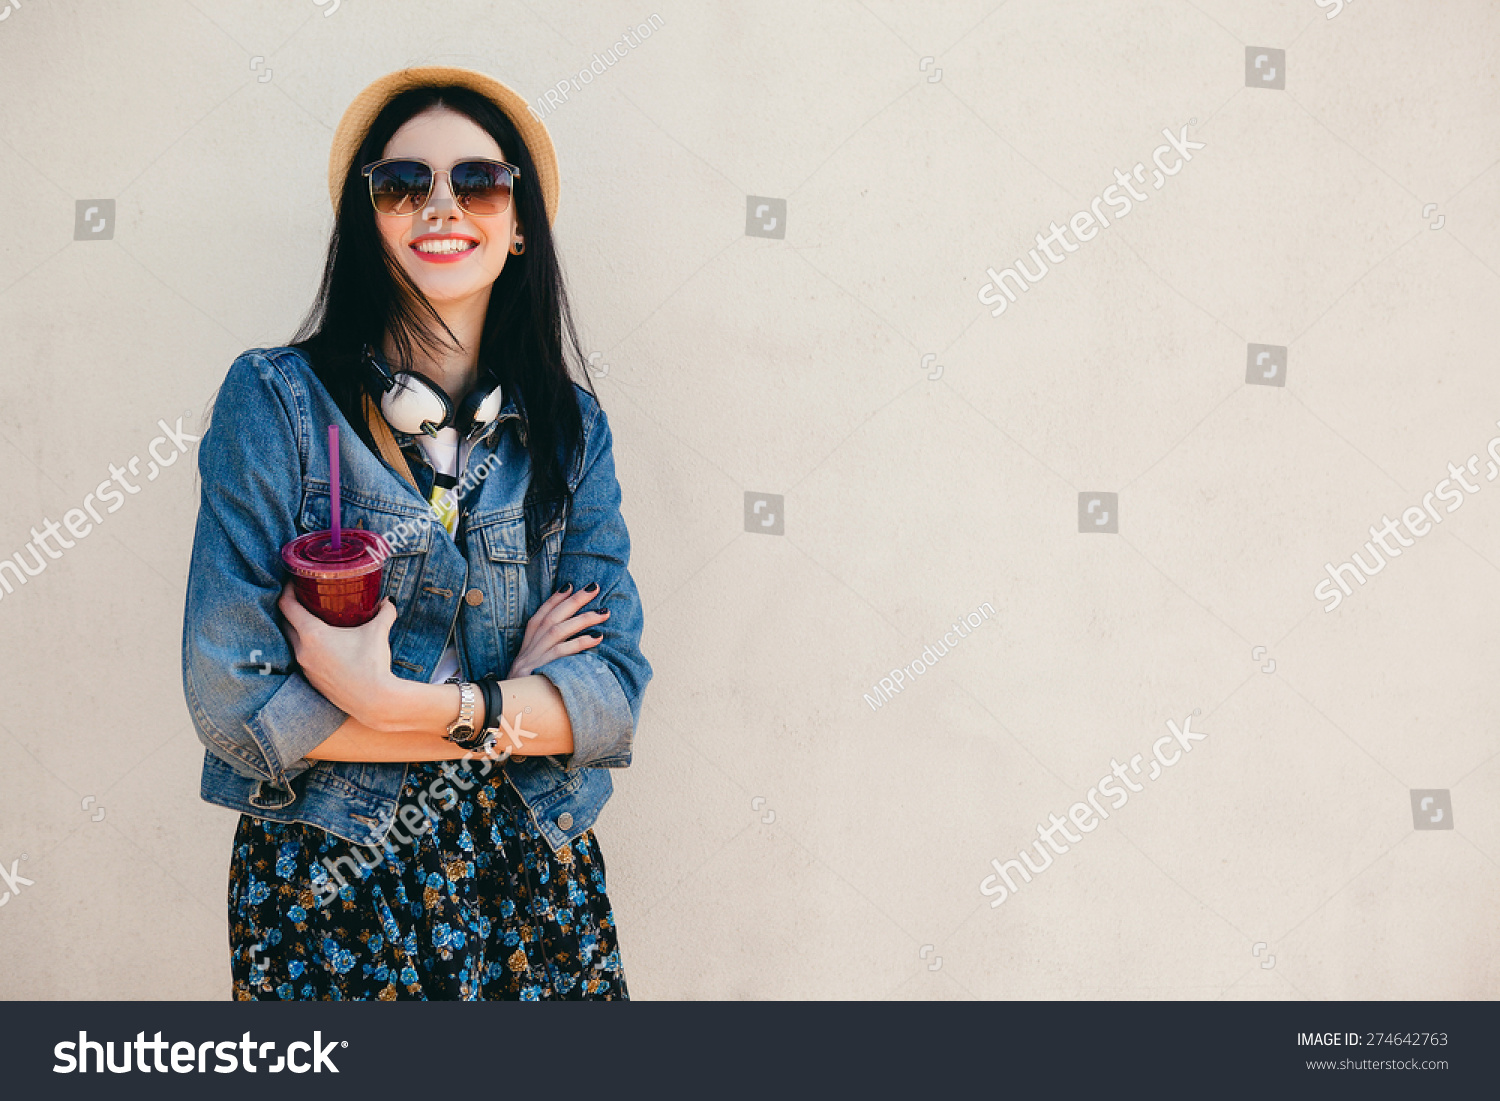 young beautiful happy stylish hipster girl, cocktail, smoozy drink, denim jacket, smiling, fashion, teen, cool accessories, purse, hat, sunglasses, amazed, vintage style, wall background, hair, wind #274642763